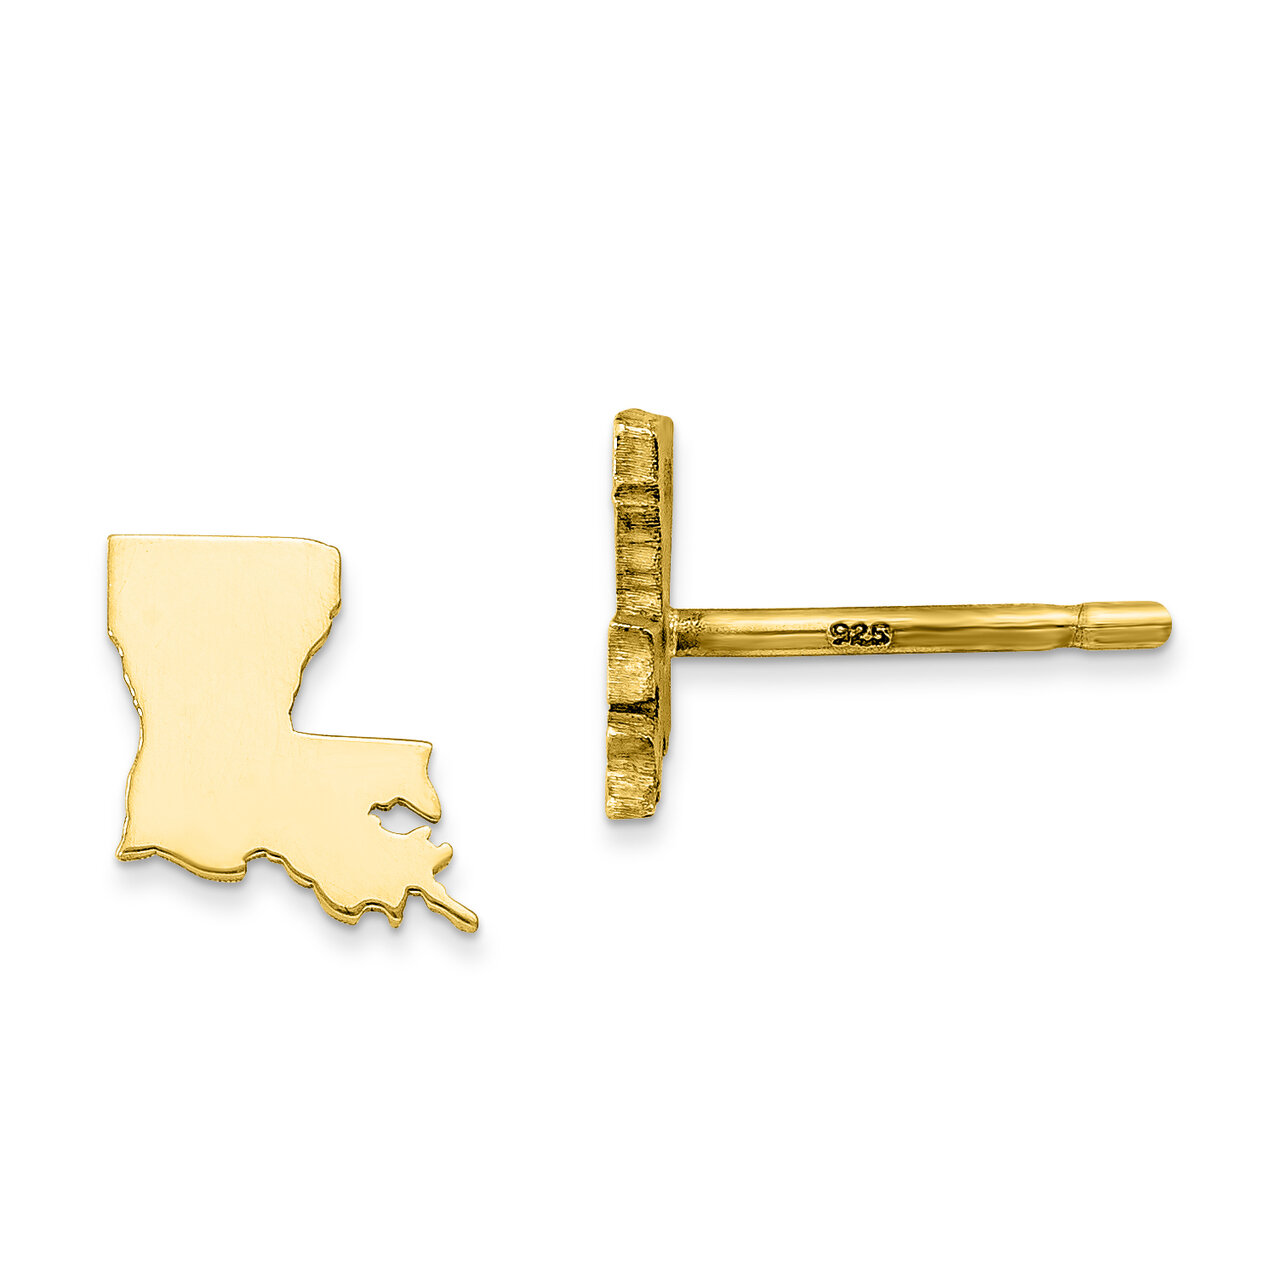 Louisiana State Small Earrings Gold-plated on Silver Engravable XNE50GP-LA